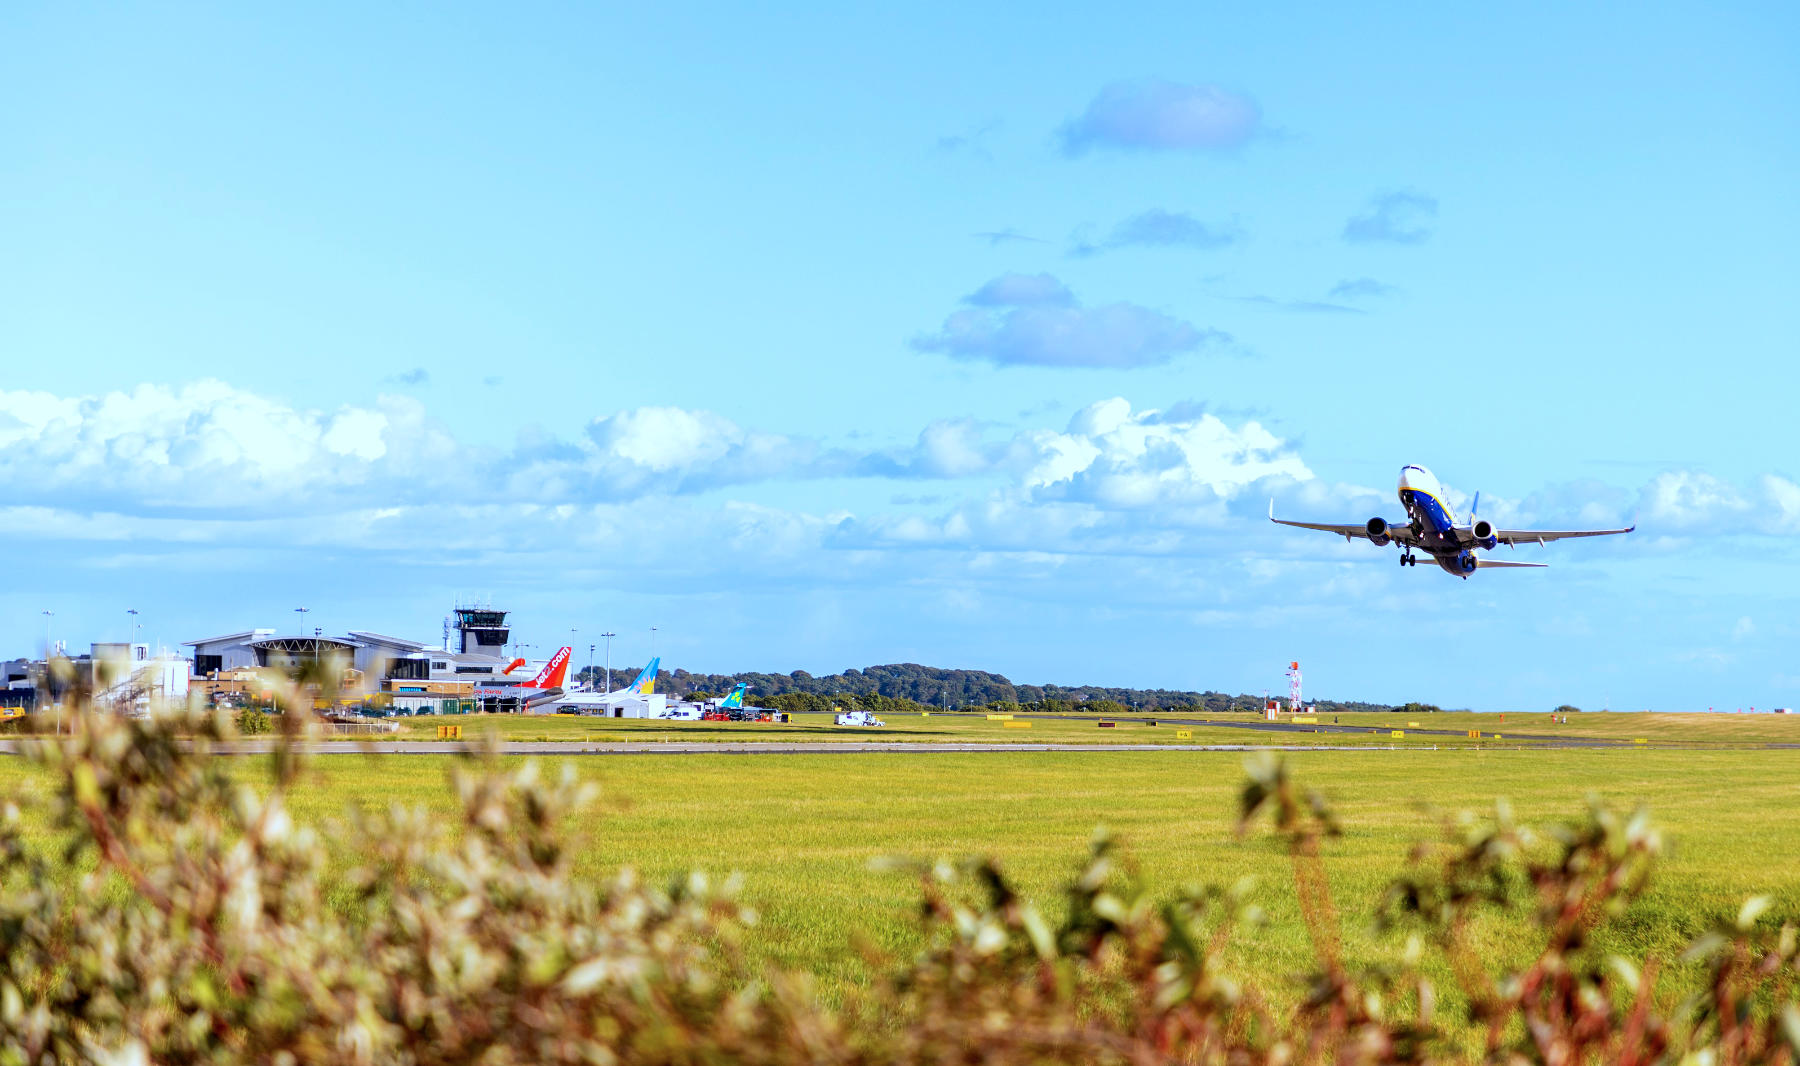 Leeds Bradford Airport (LBA) has announced that a record-breaking number of destinations are now available to book for 2023 and 2024